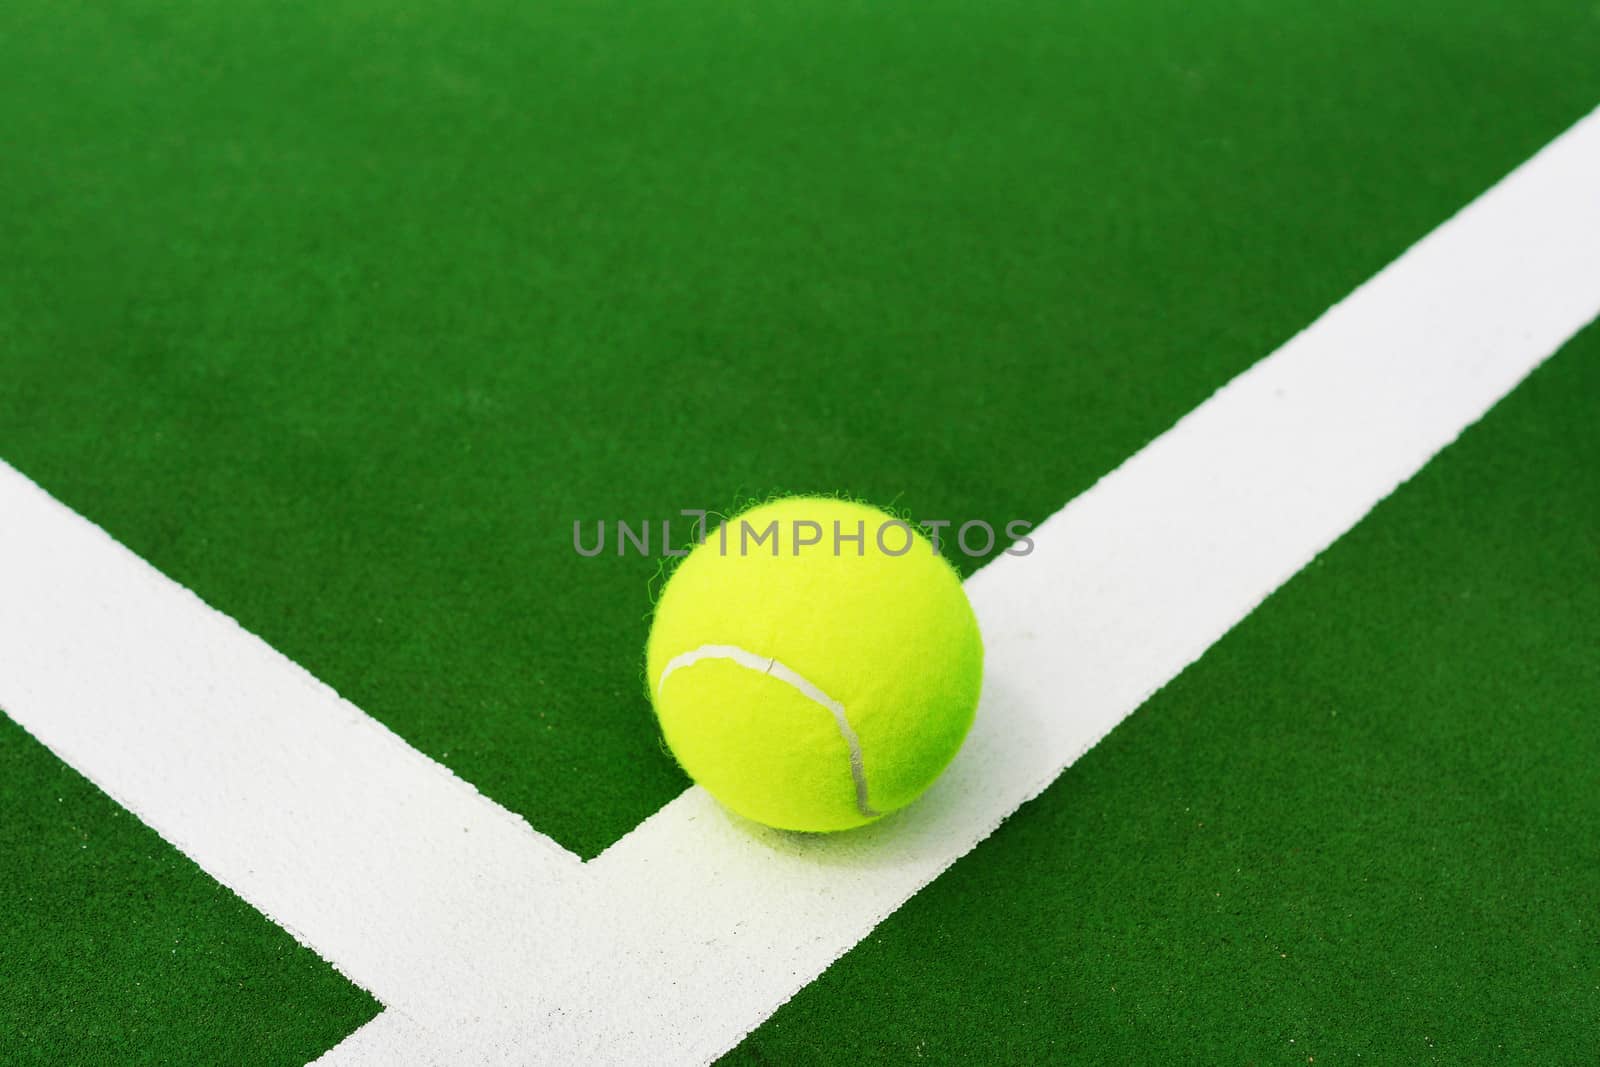 Tennis ball on white line by Mirage3